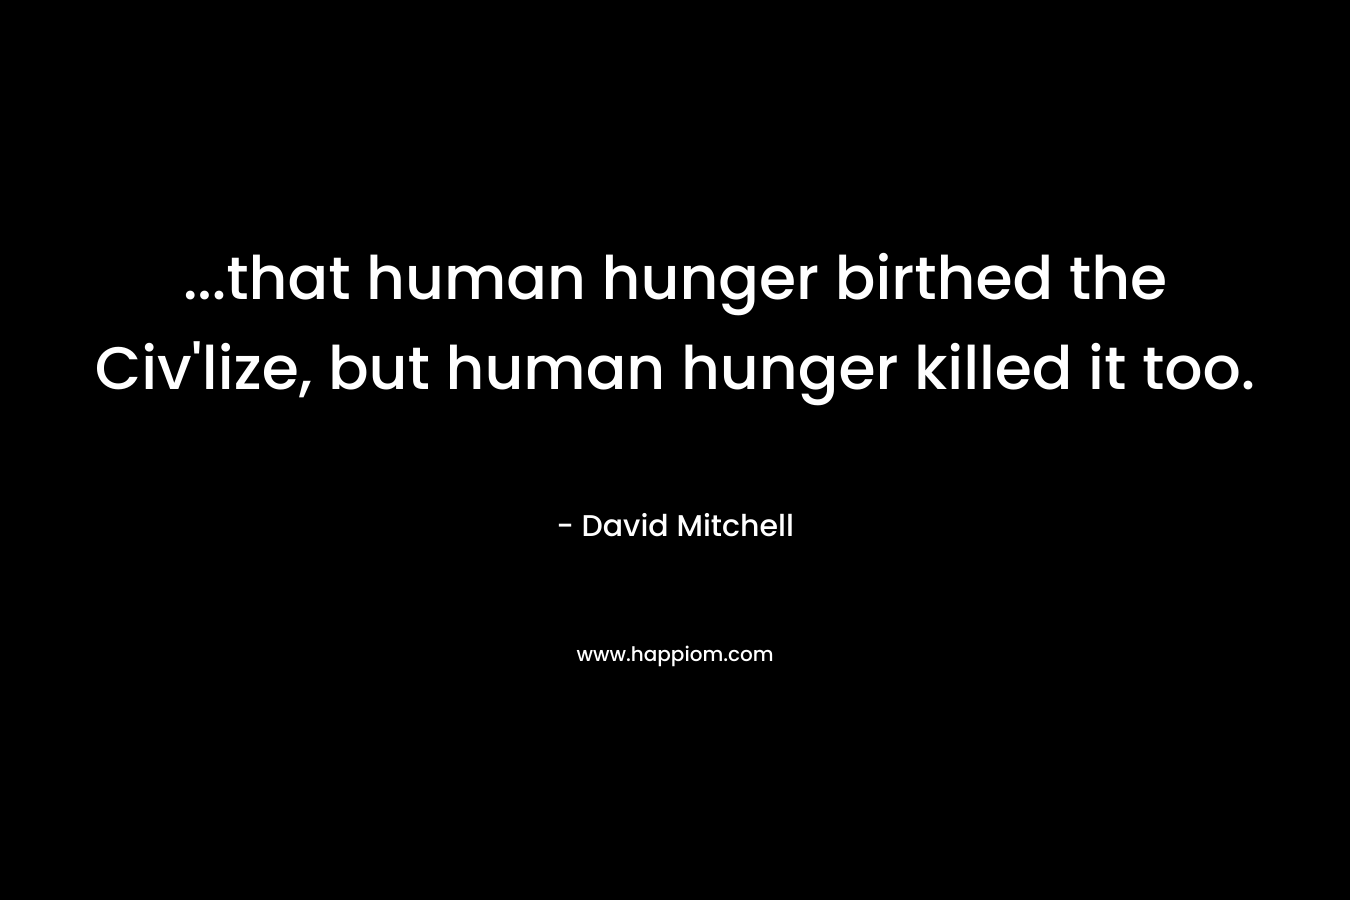 ...that human hunger birthed the Civ'lize, but human hunger killed it too.